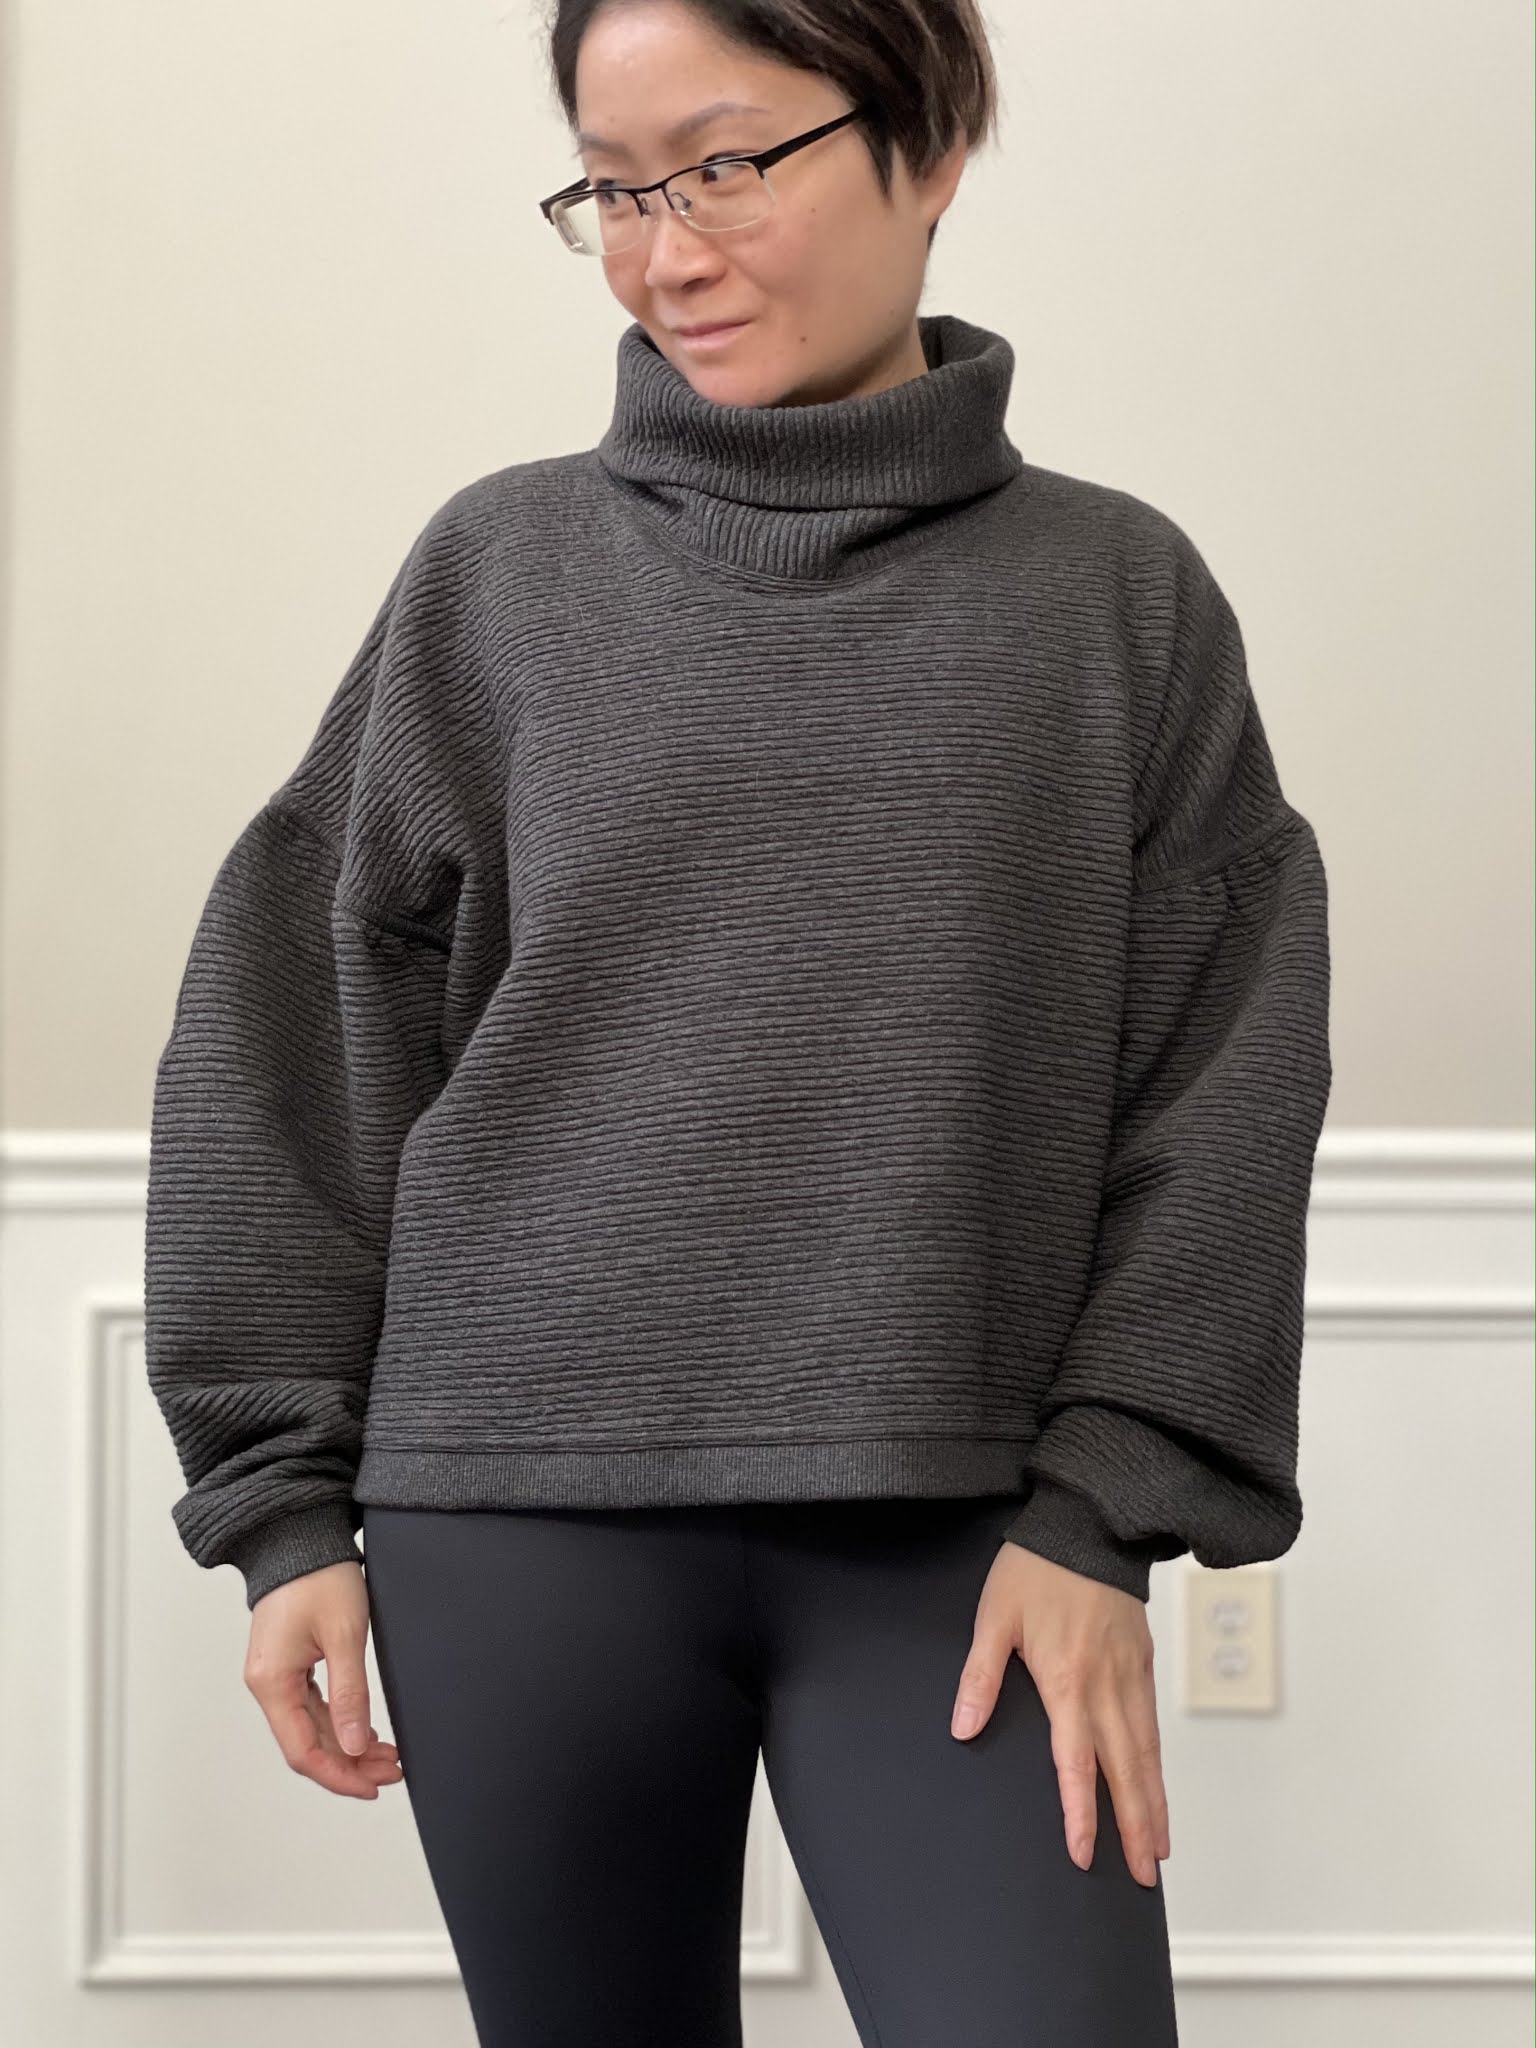 Fit Review Friday! Peaceful Moments Pullover, Scuba High Rise